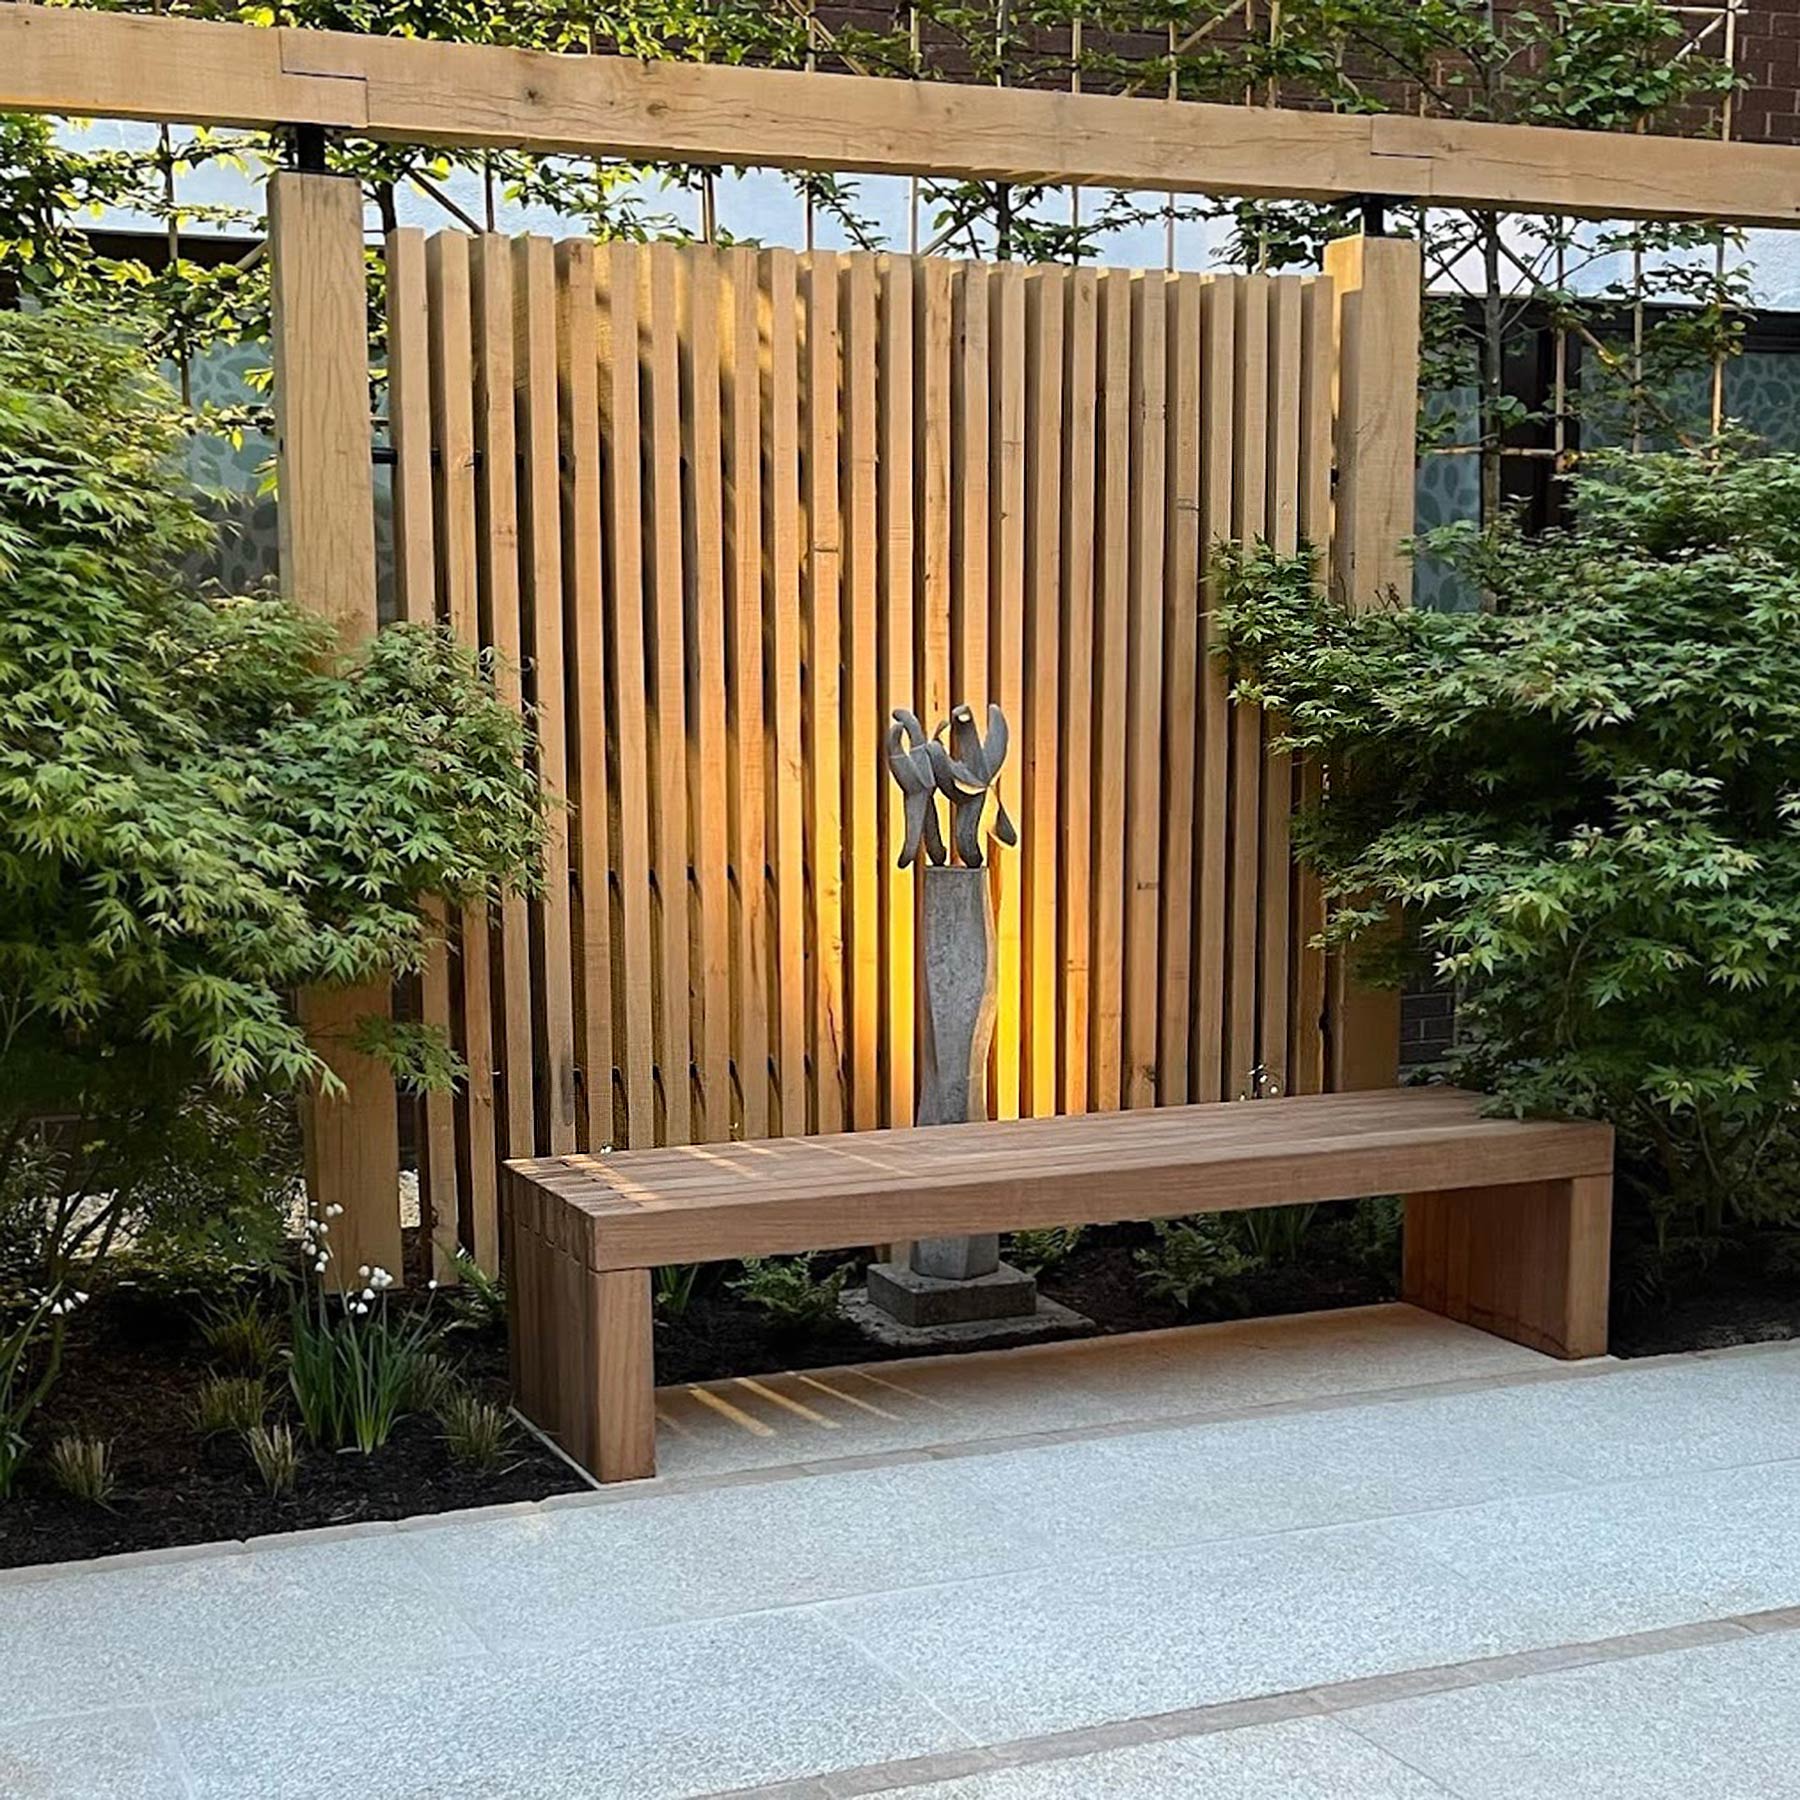 The Eternal Garden at St Peter's Hospital by Rae Wilkinson Design 